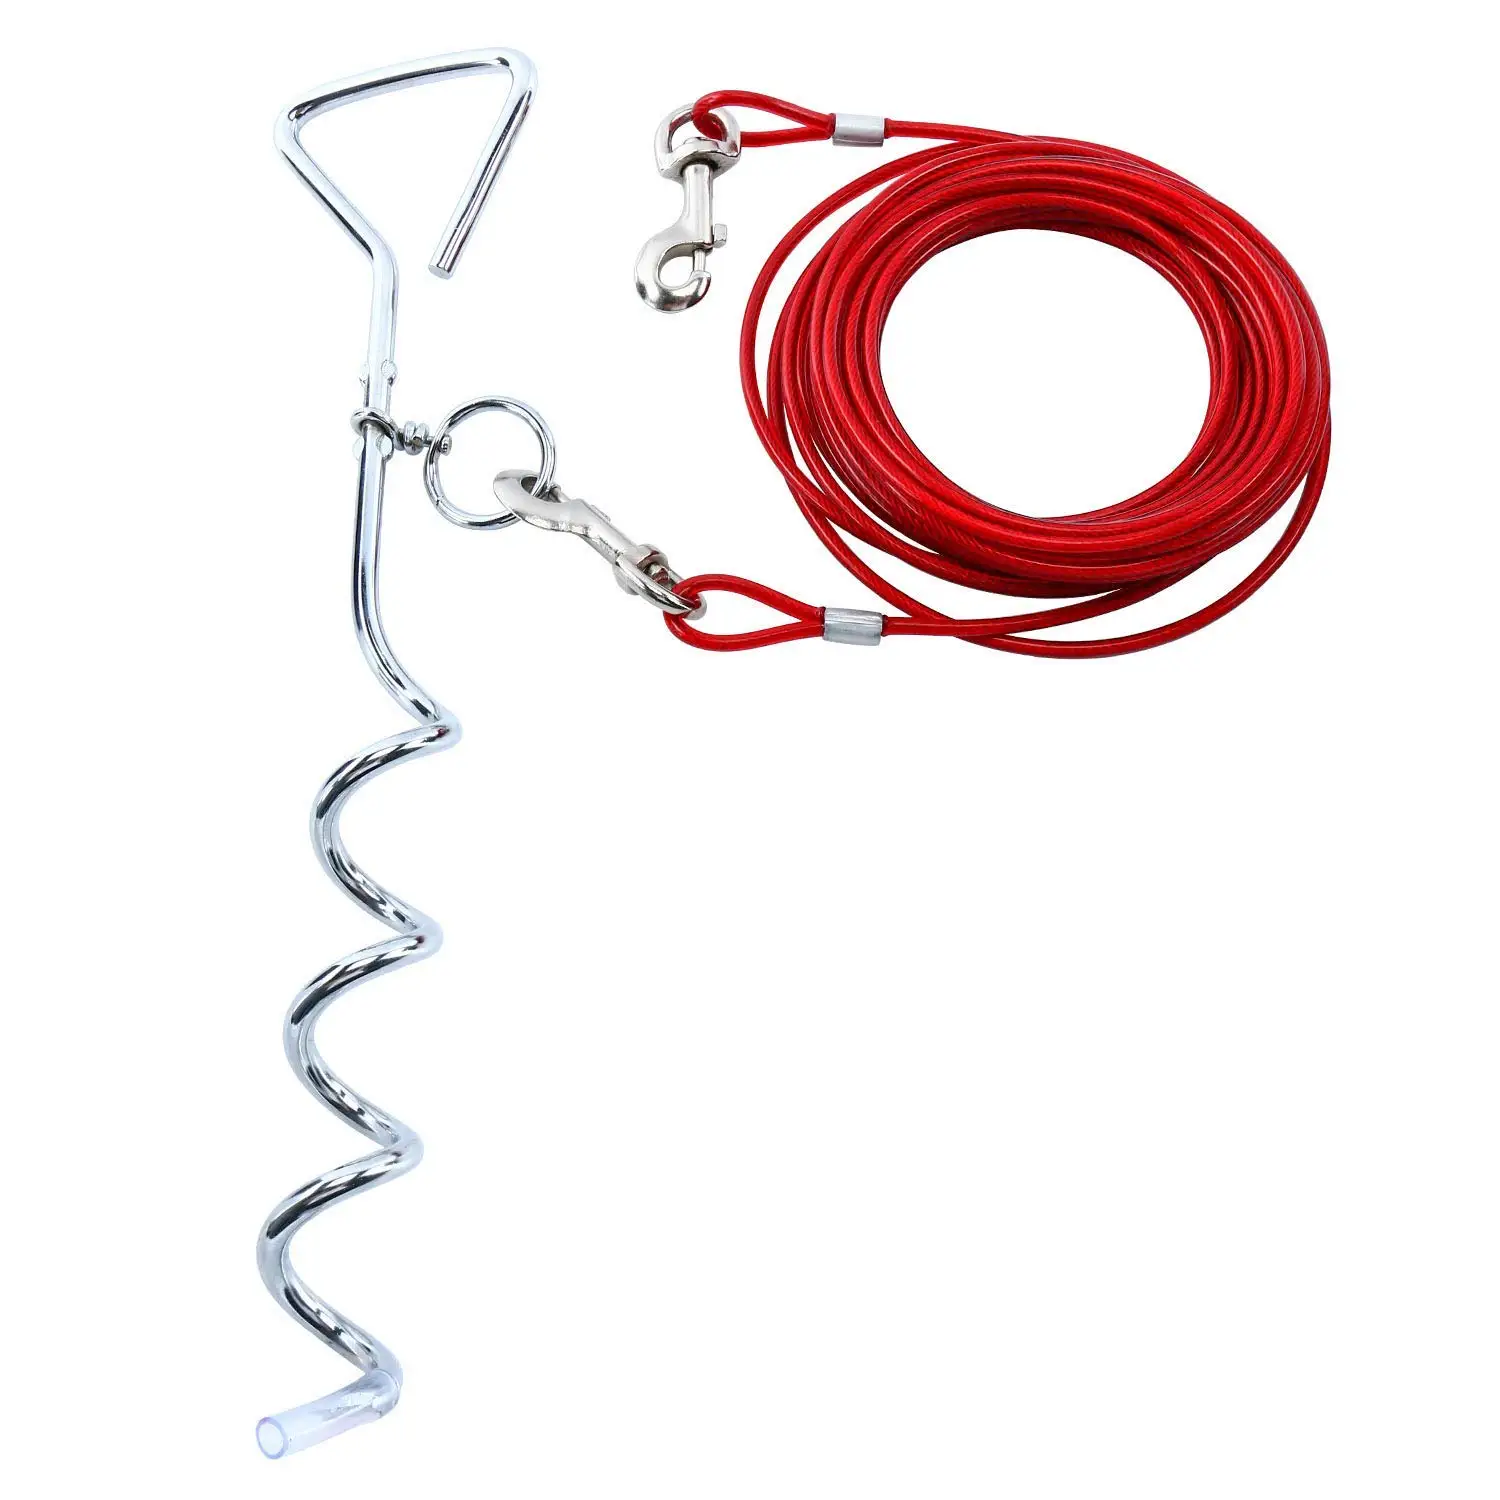 Zinco Dog tie-Out Spiral Stake Comes with a 10 feet Double connectors Vinyl Coated Galvanized Cable. 18 inch Long manually Screwed in The Ground Will Prevents Pulling Out and Bending